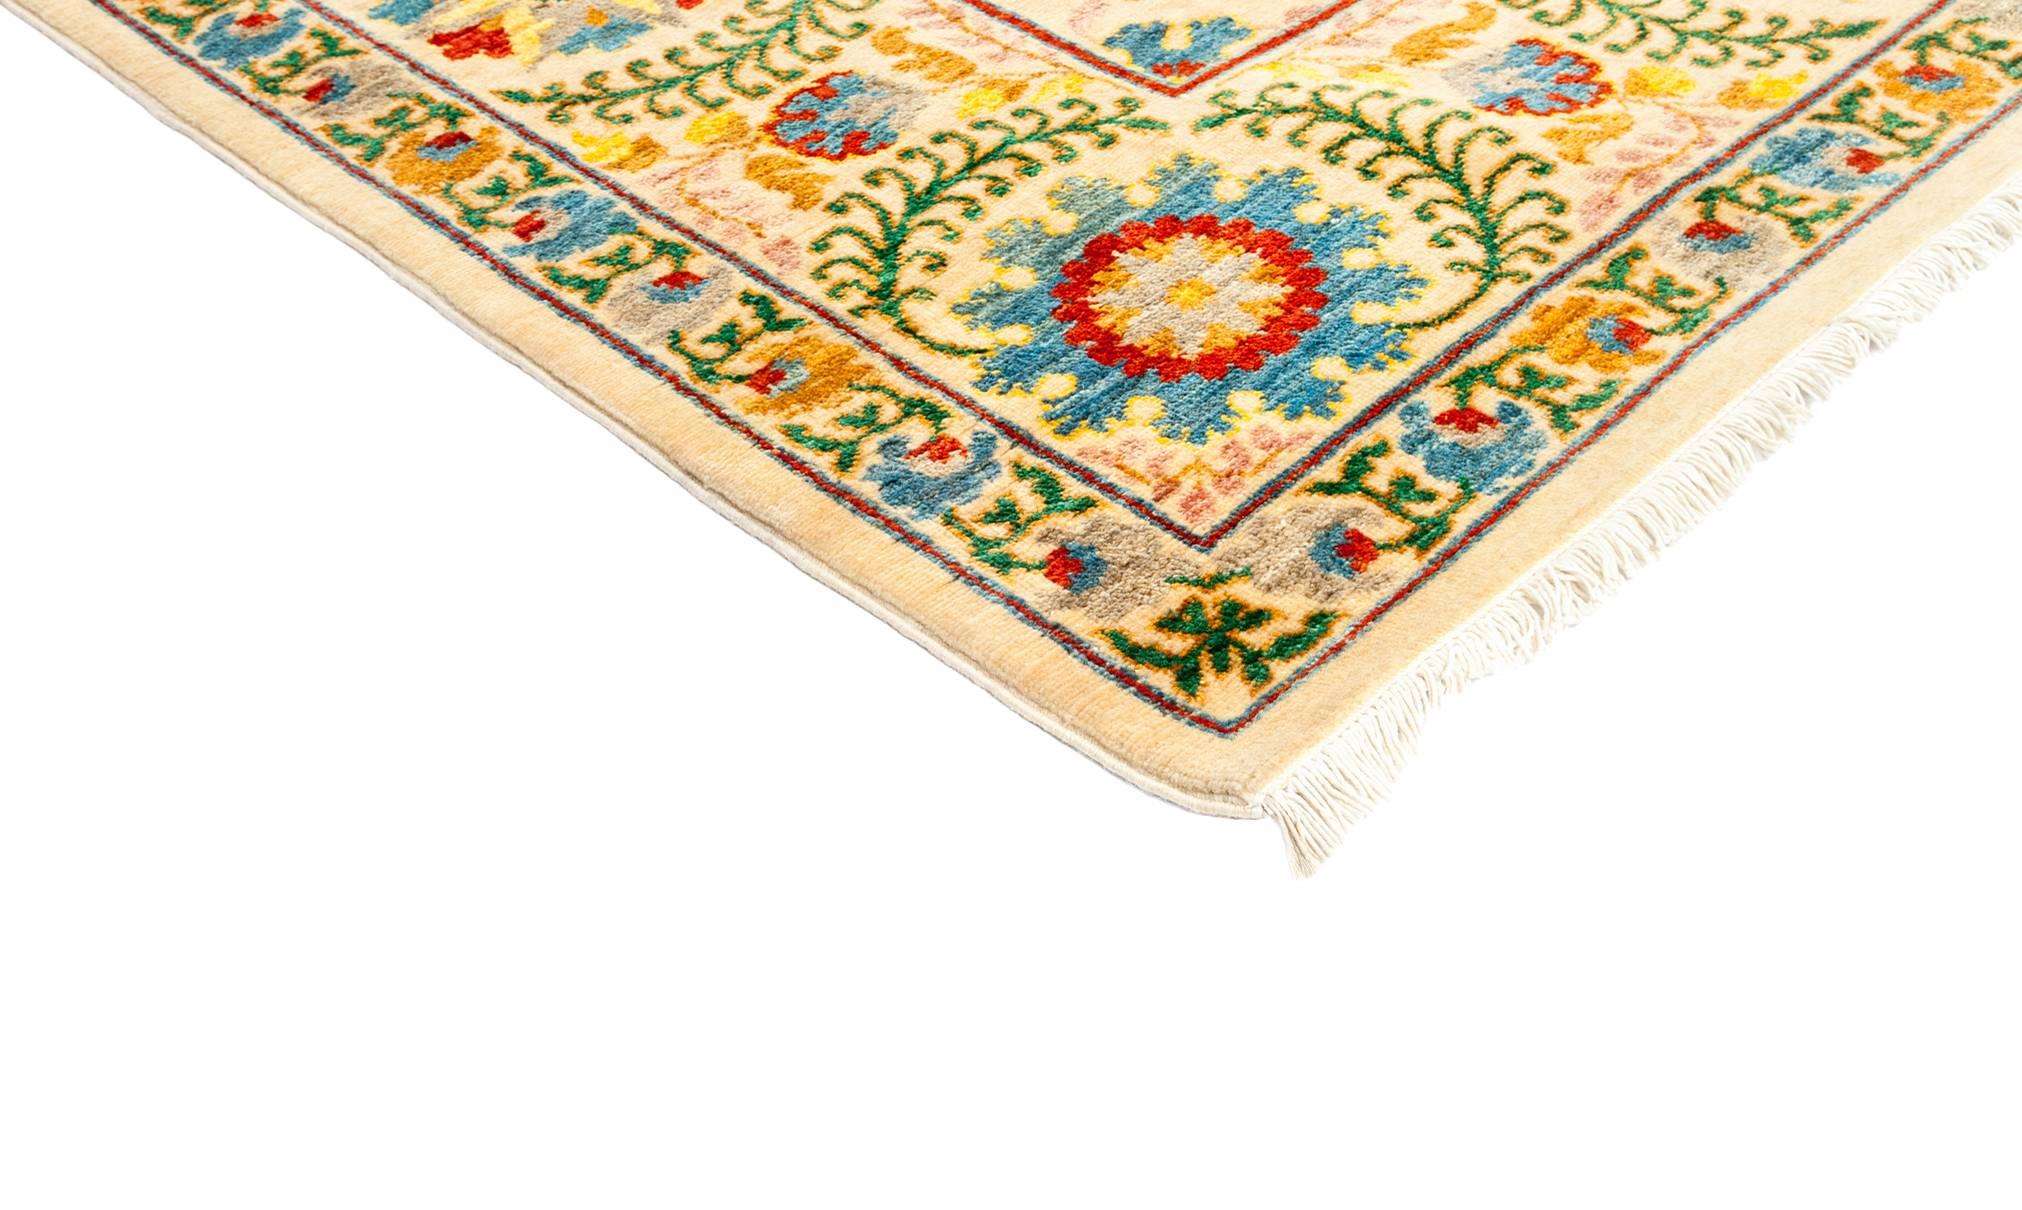 Inspired by embroidered Suzani textiles from Uzbekistan, this rug features floral motifs in modern palettes and compositions. Hand-knotted of vegetable-dyed wool, the rugs are designed to retain their vibrancy for generations to come. Measures: 8'3